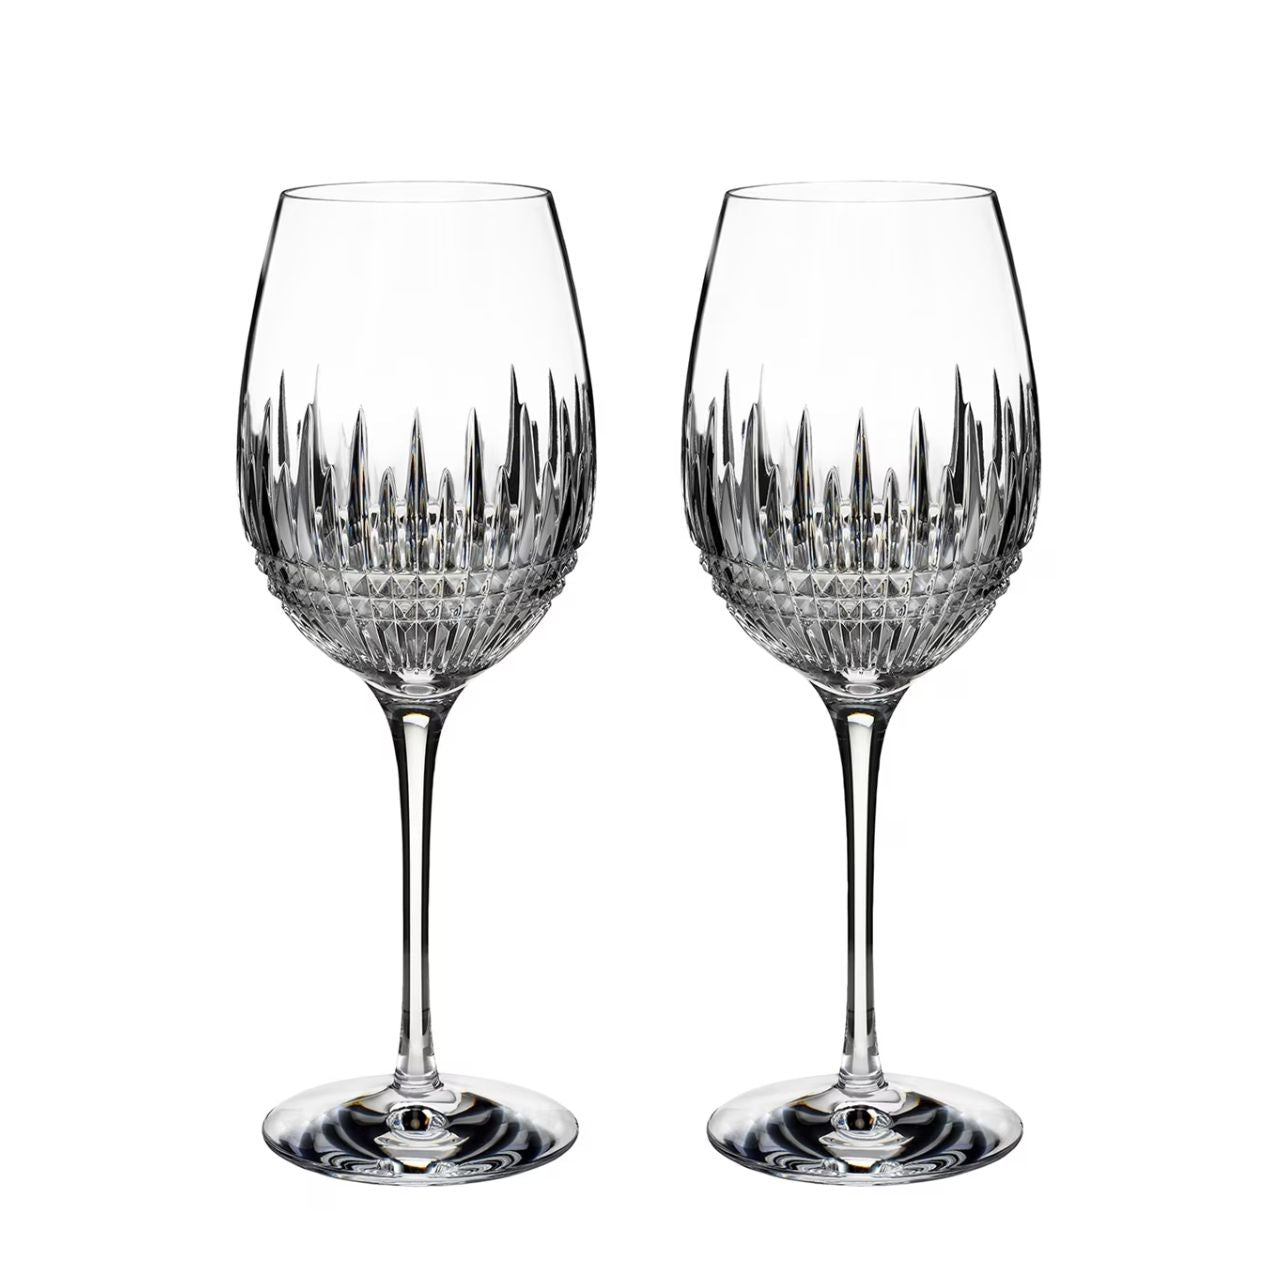 Waterford Crystal Lismore Diamond Essence Goblet Pair  This classic Lismore Diamond Essence Goblet Pair from Waterford offer the perfect serve for water, juice or your favourite fruit punch, and are the ideal luxury all-purpose drinking glass for your home.